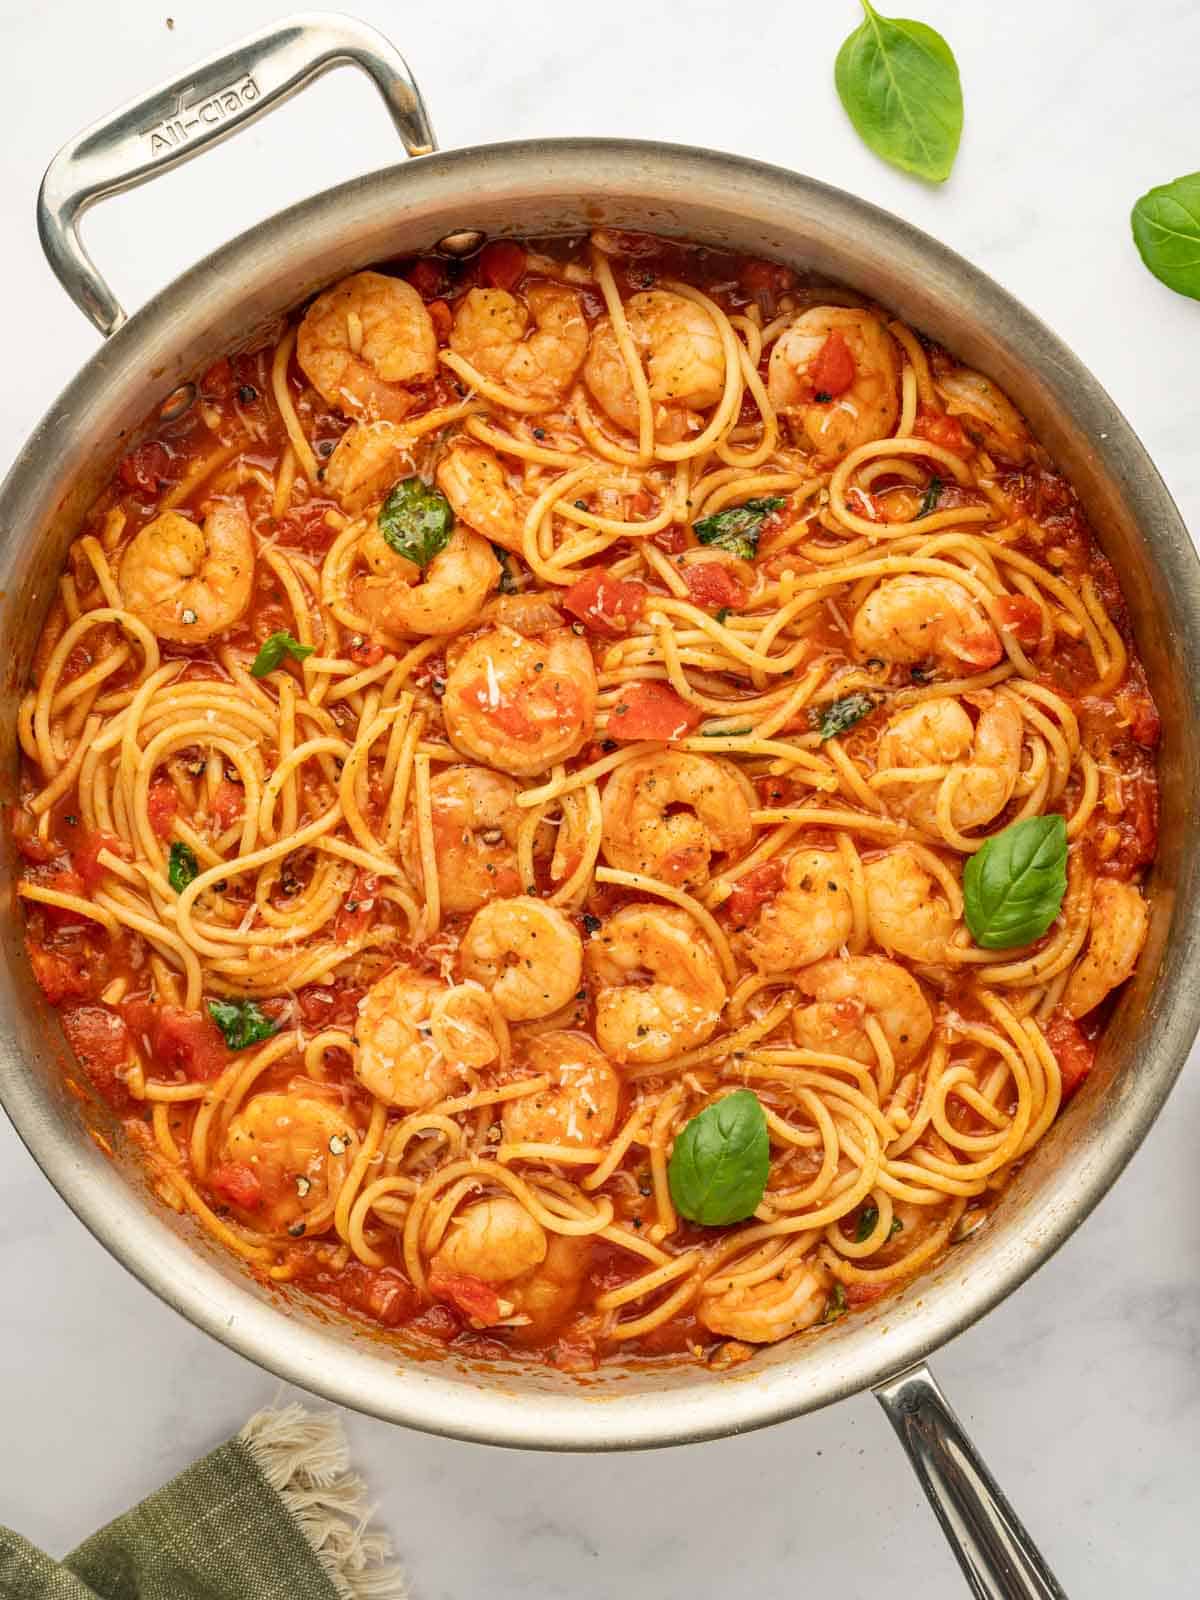 Shrimp spaghetti garnished with basil in a skillet.